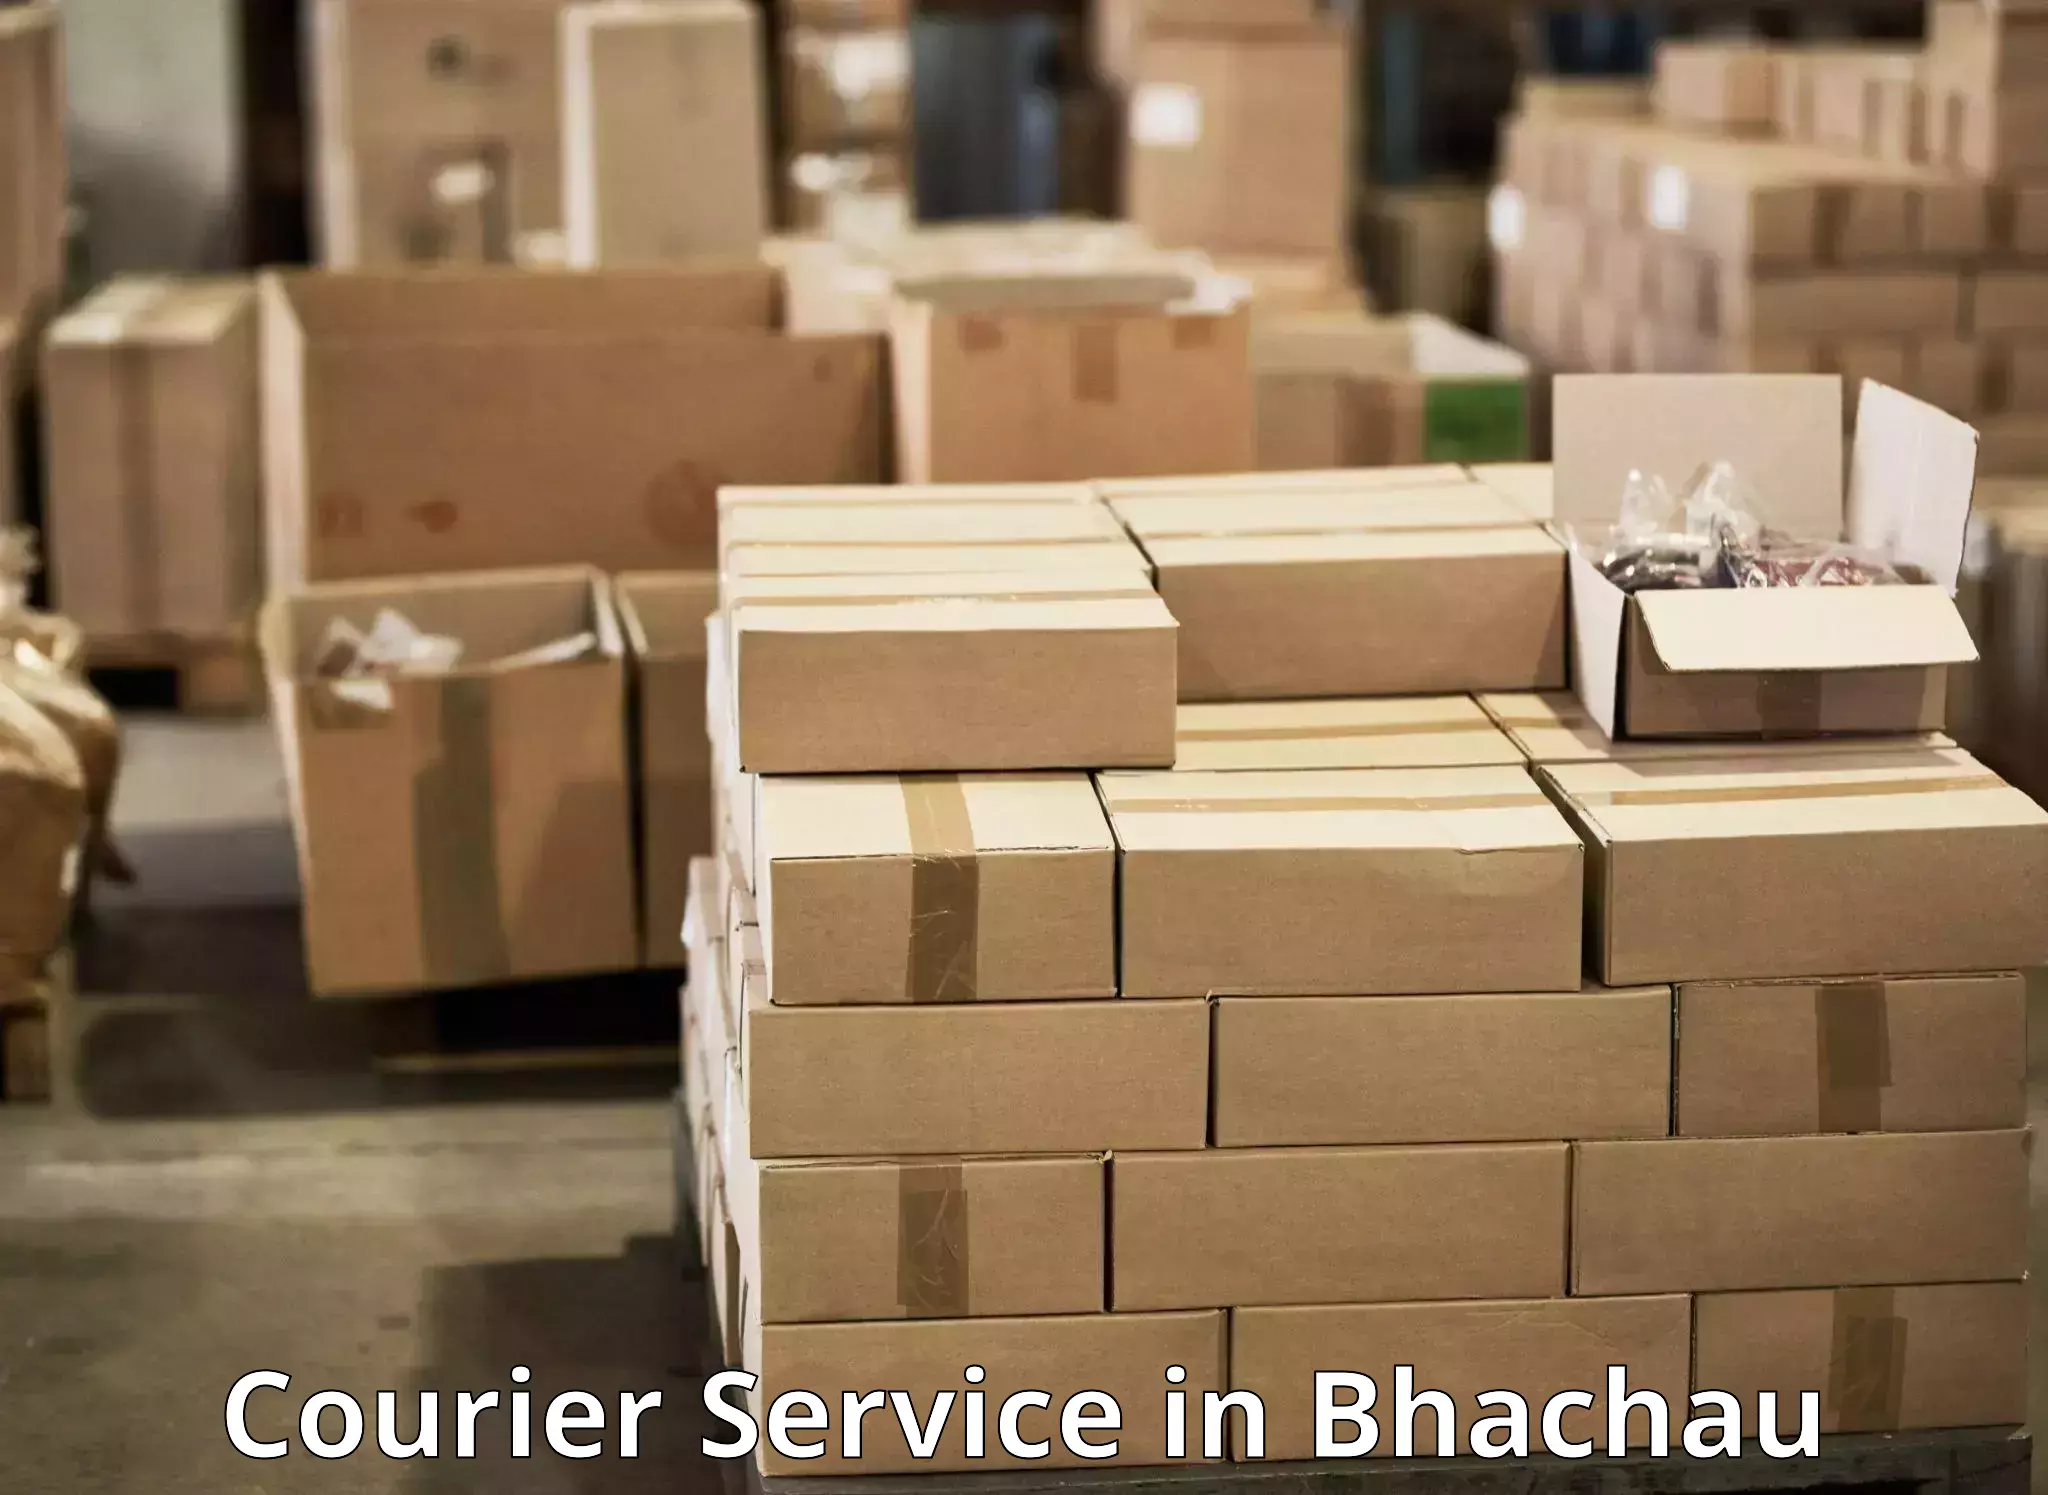 Express package services in Bhachau